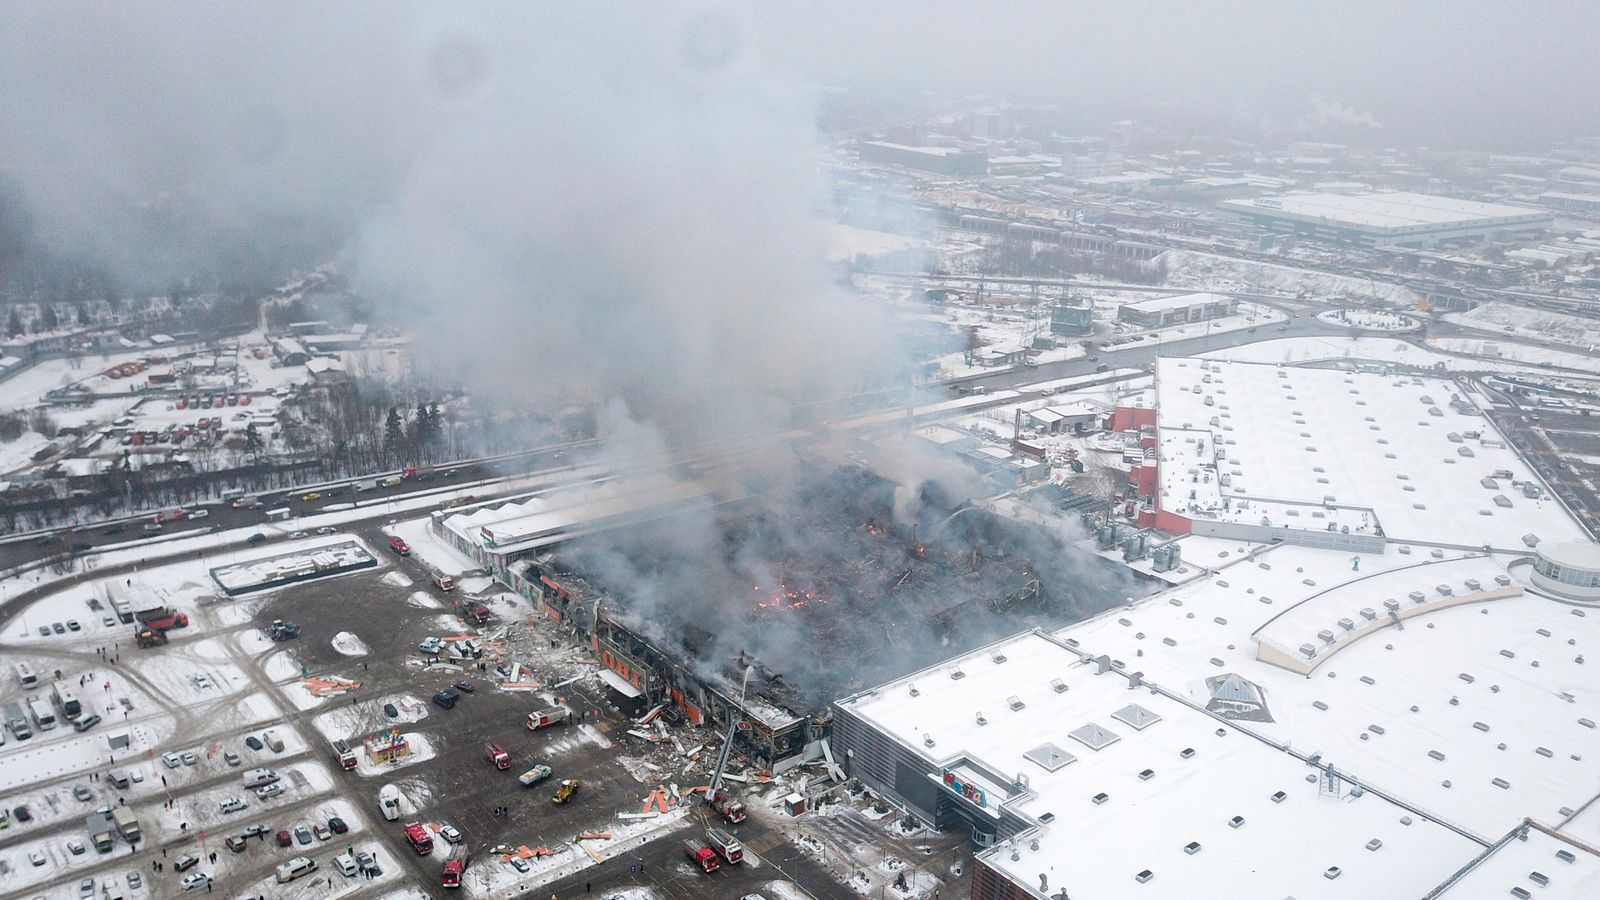 Fire engulfs Russian shopping centre near Moscow, killing at least one person